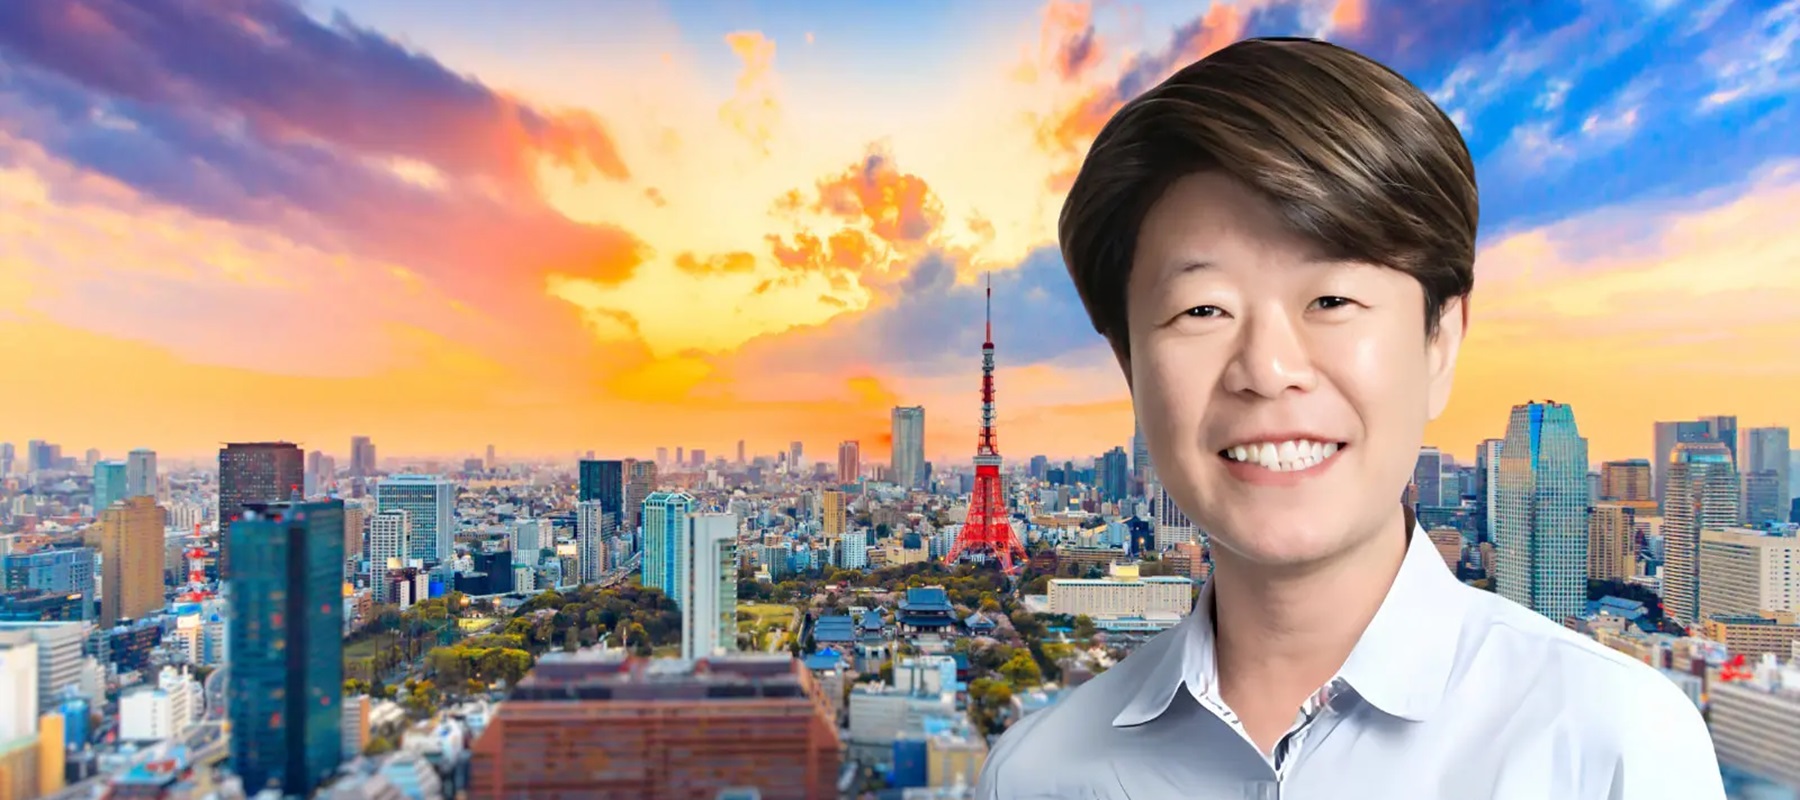 EssenceMediacom appoints Wendy Siew as Managing Director for Japan